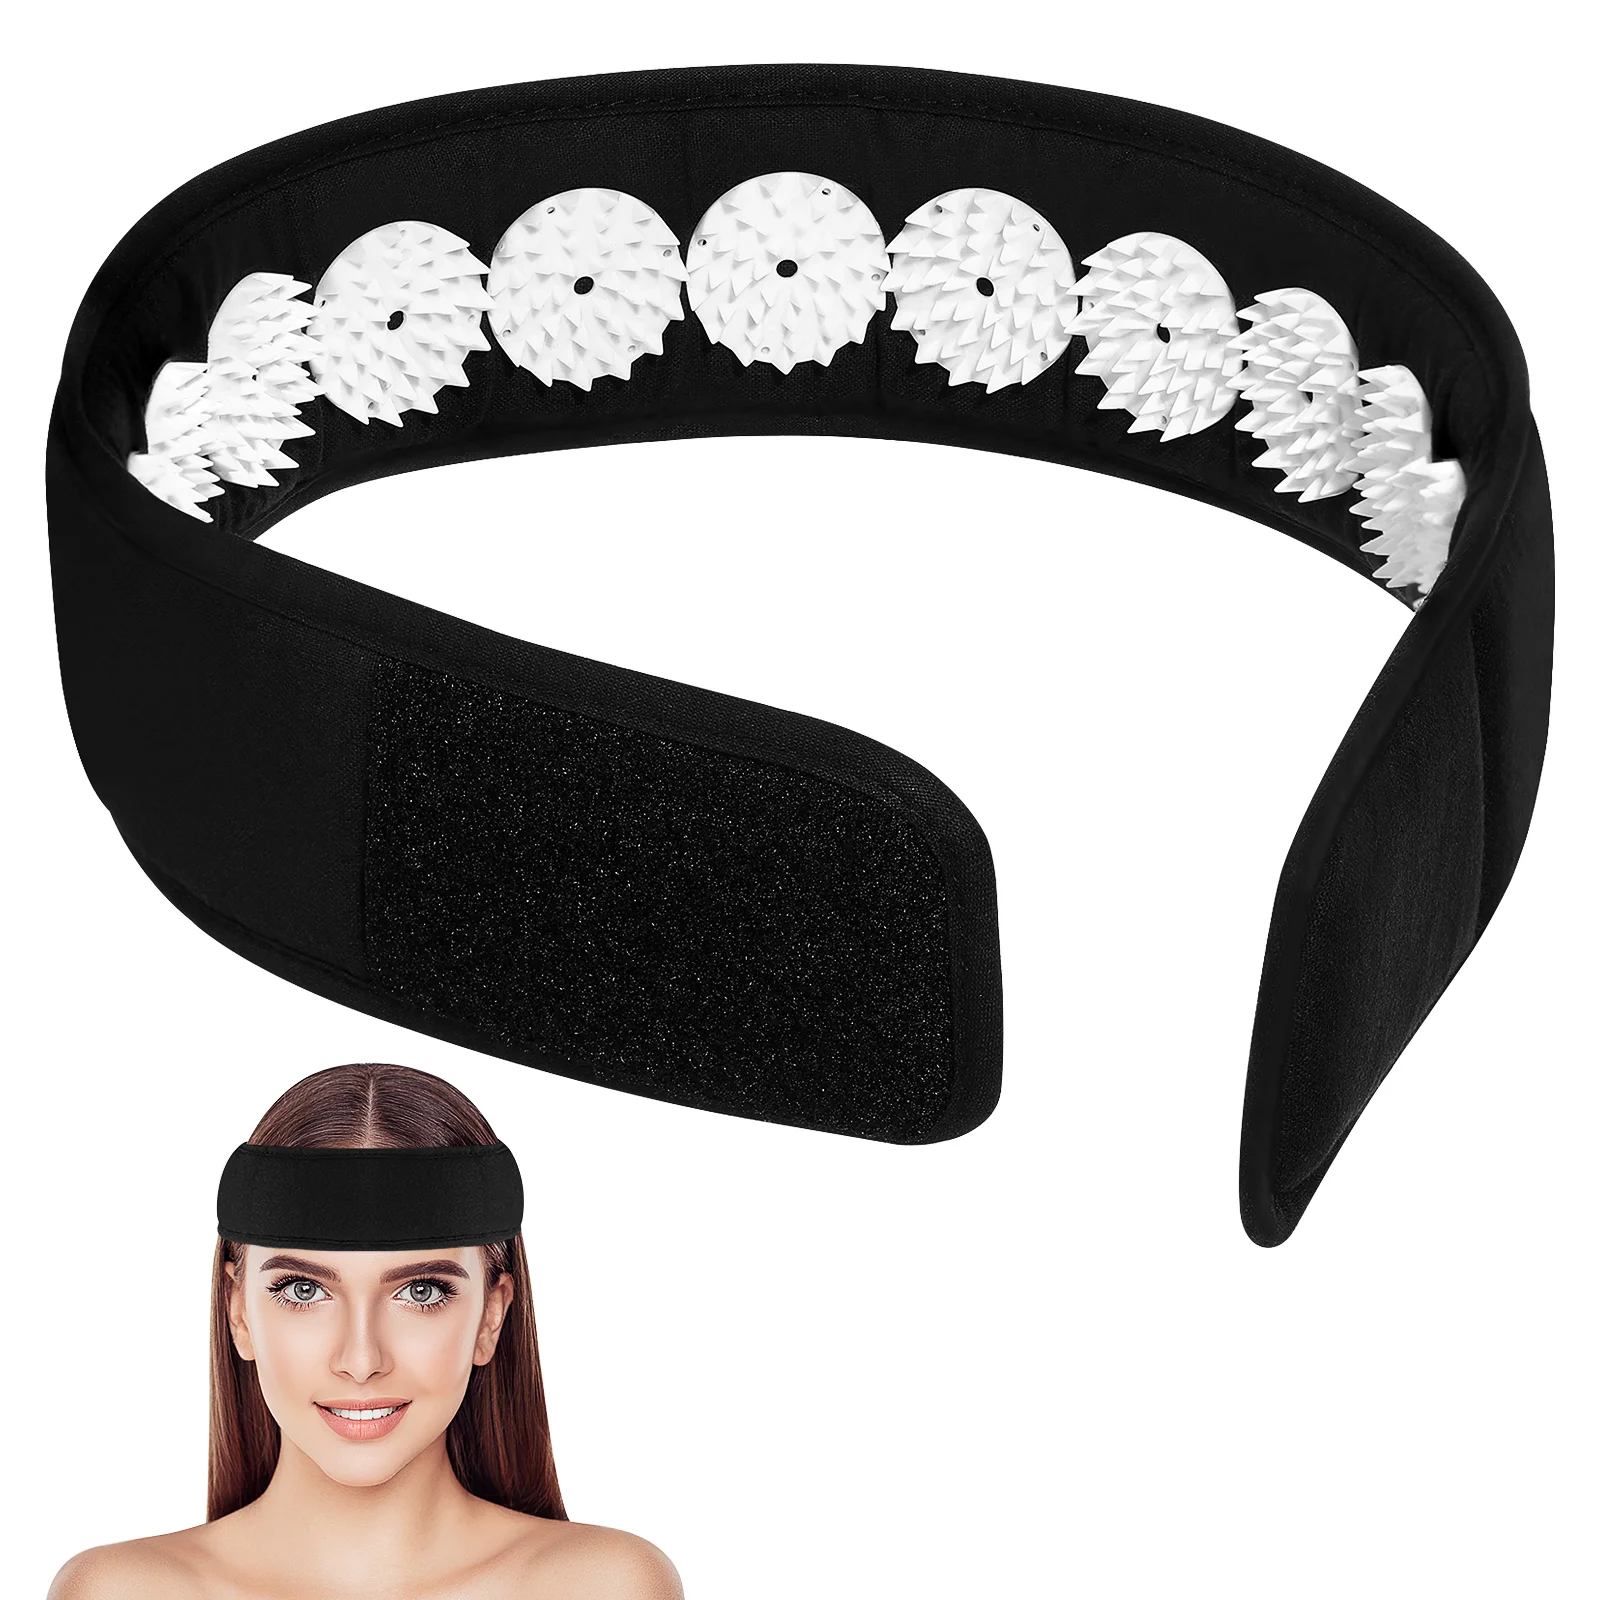 

Acupressure Wrap Acupuncture Massage Facial Skin Lift Up and Chin Up Belt Headband for Neck Head Pain Relief Muscle Stress